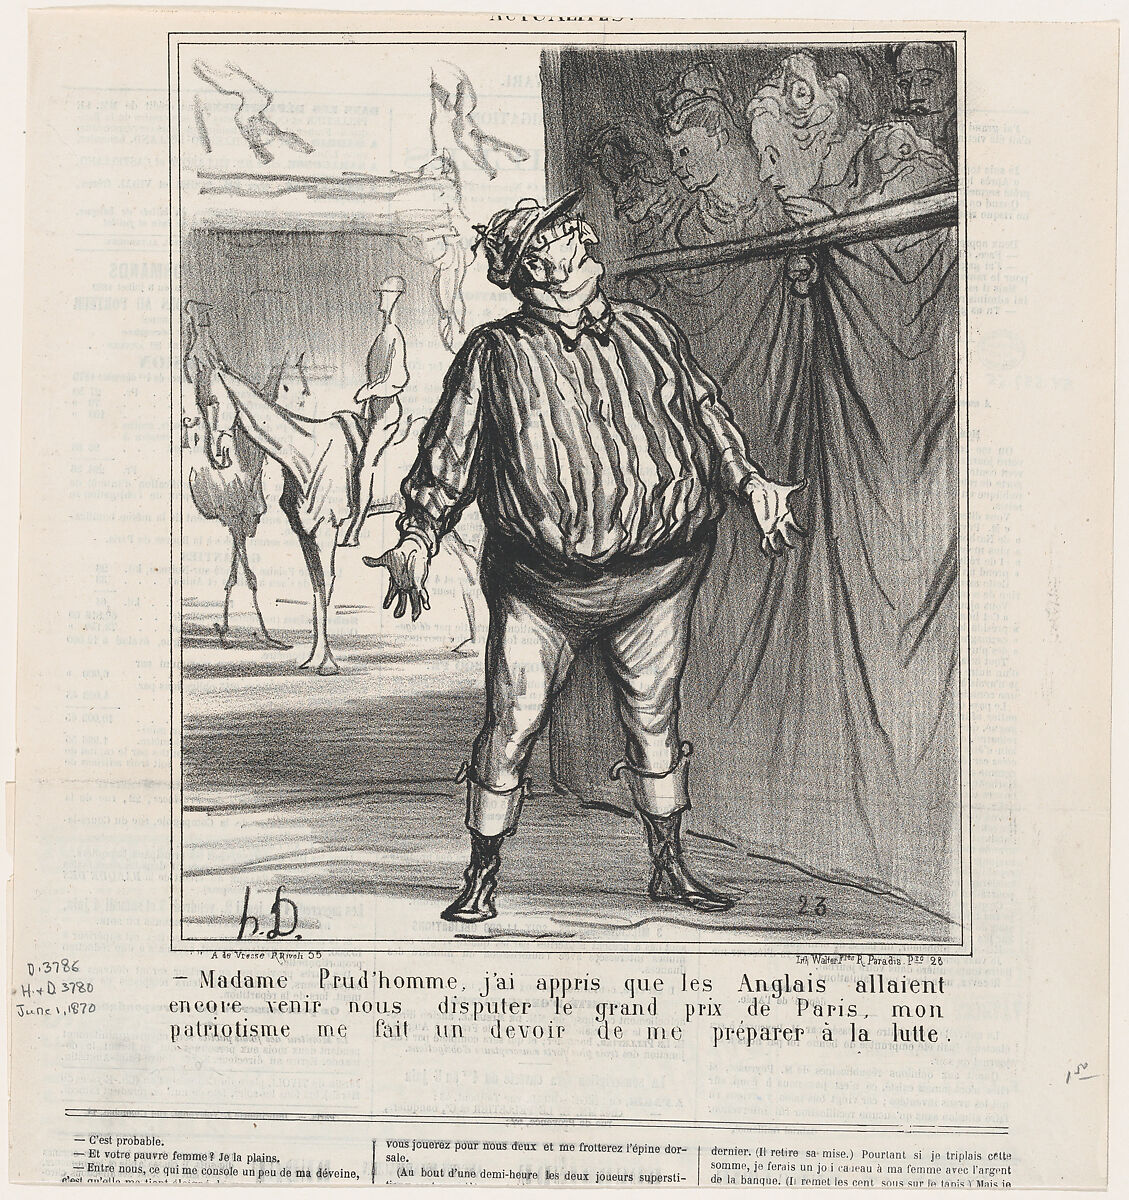 Madame Prudhomme, I have learned that the English are going to challenge us in the Paris Grand Prix. My patriotism makes it my duty to prepare for this struggle, from 'News of the day,' published in Le Charivari, June 1, 1870, Honoré Daumier (French, Marseilles 1808–1879 Valmondois), Lithograph on newsprint; third state of three (Delteil) 